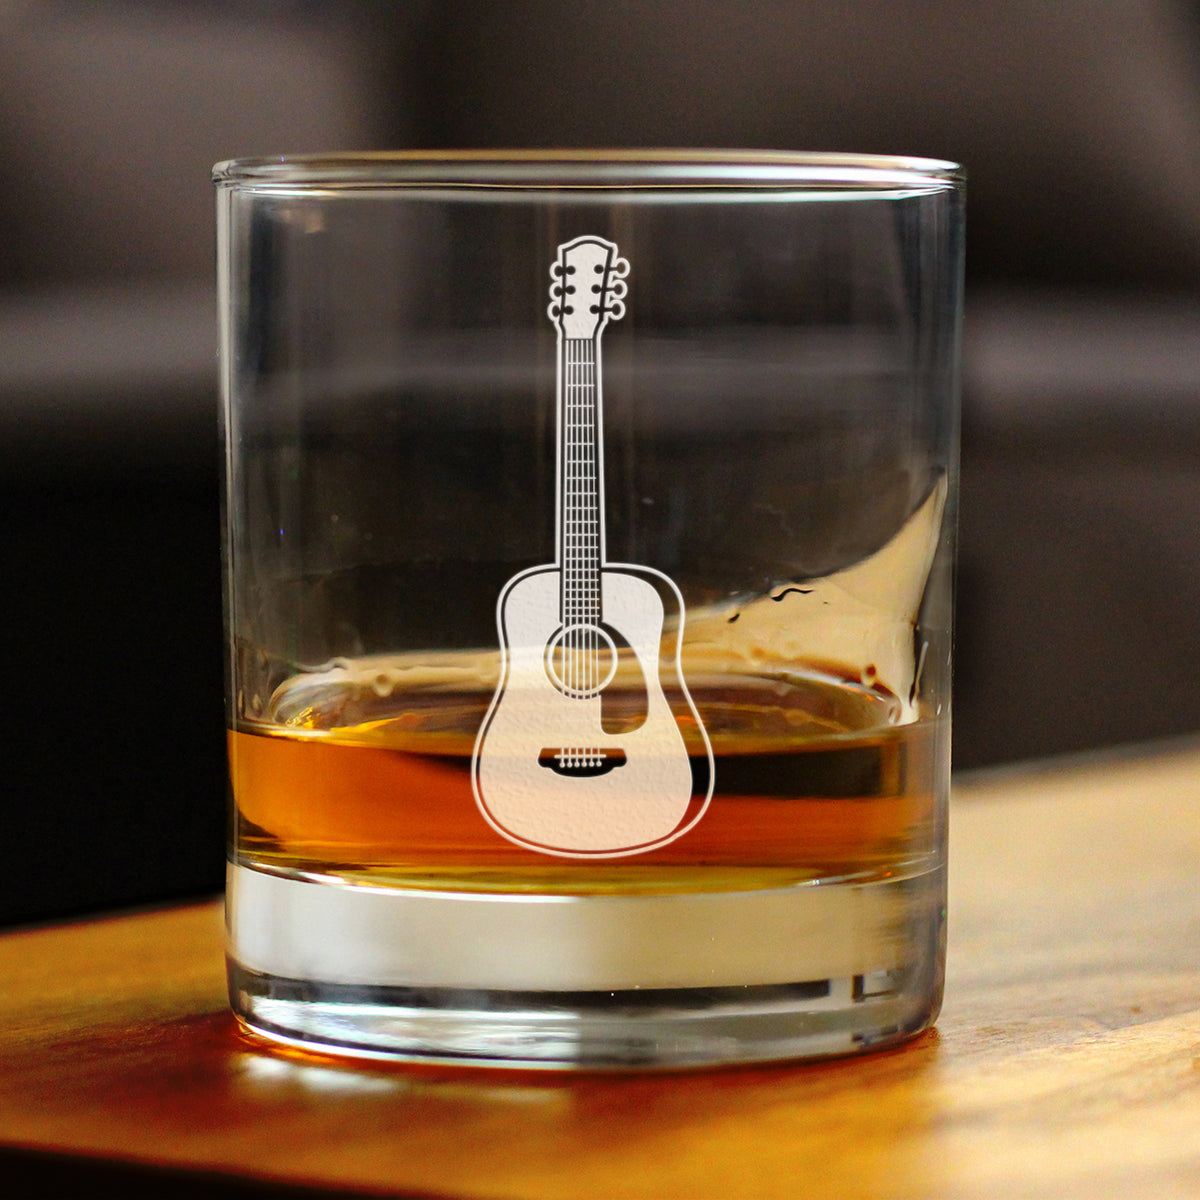 Guitar - Rocks Glass - Fun Musician Gifts and Musical Accessories for Women and Men - 10.25 Oz Glasses